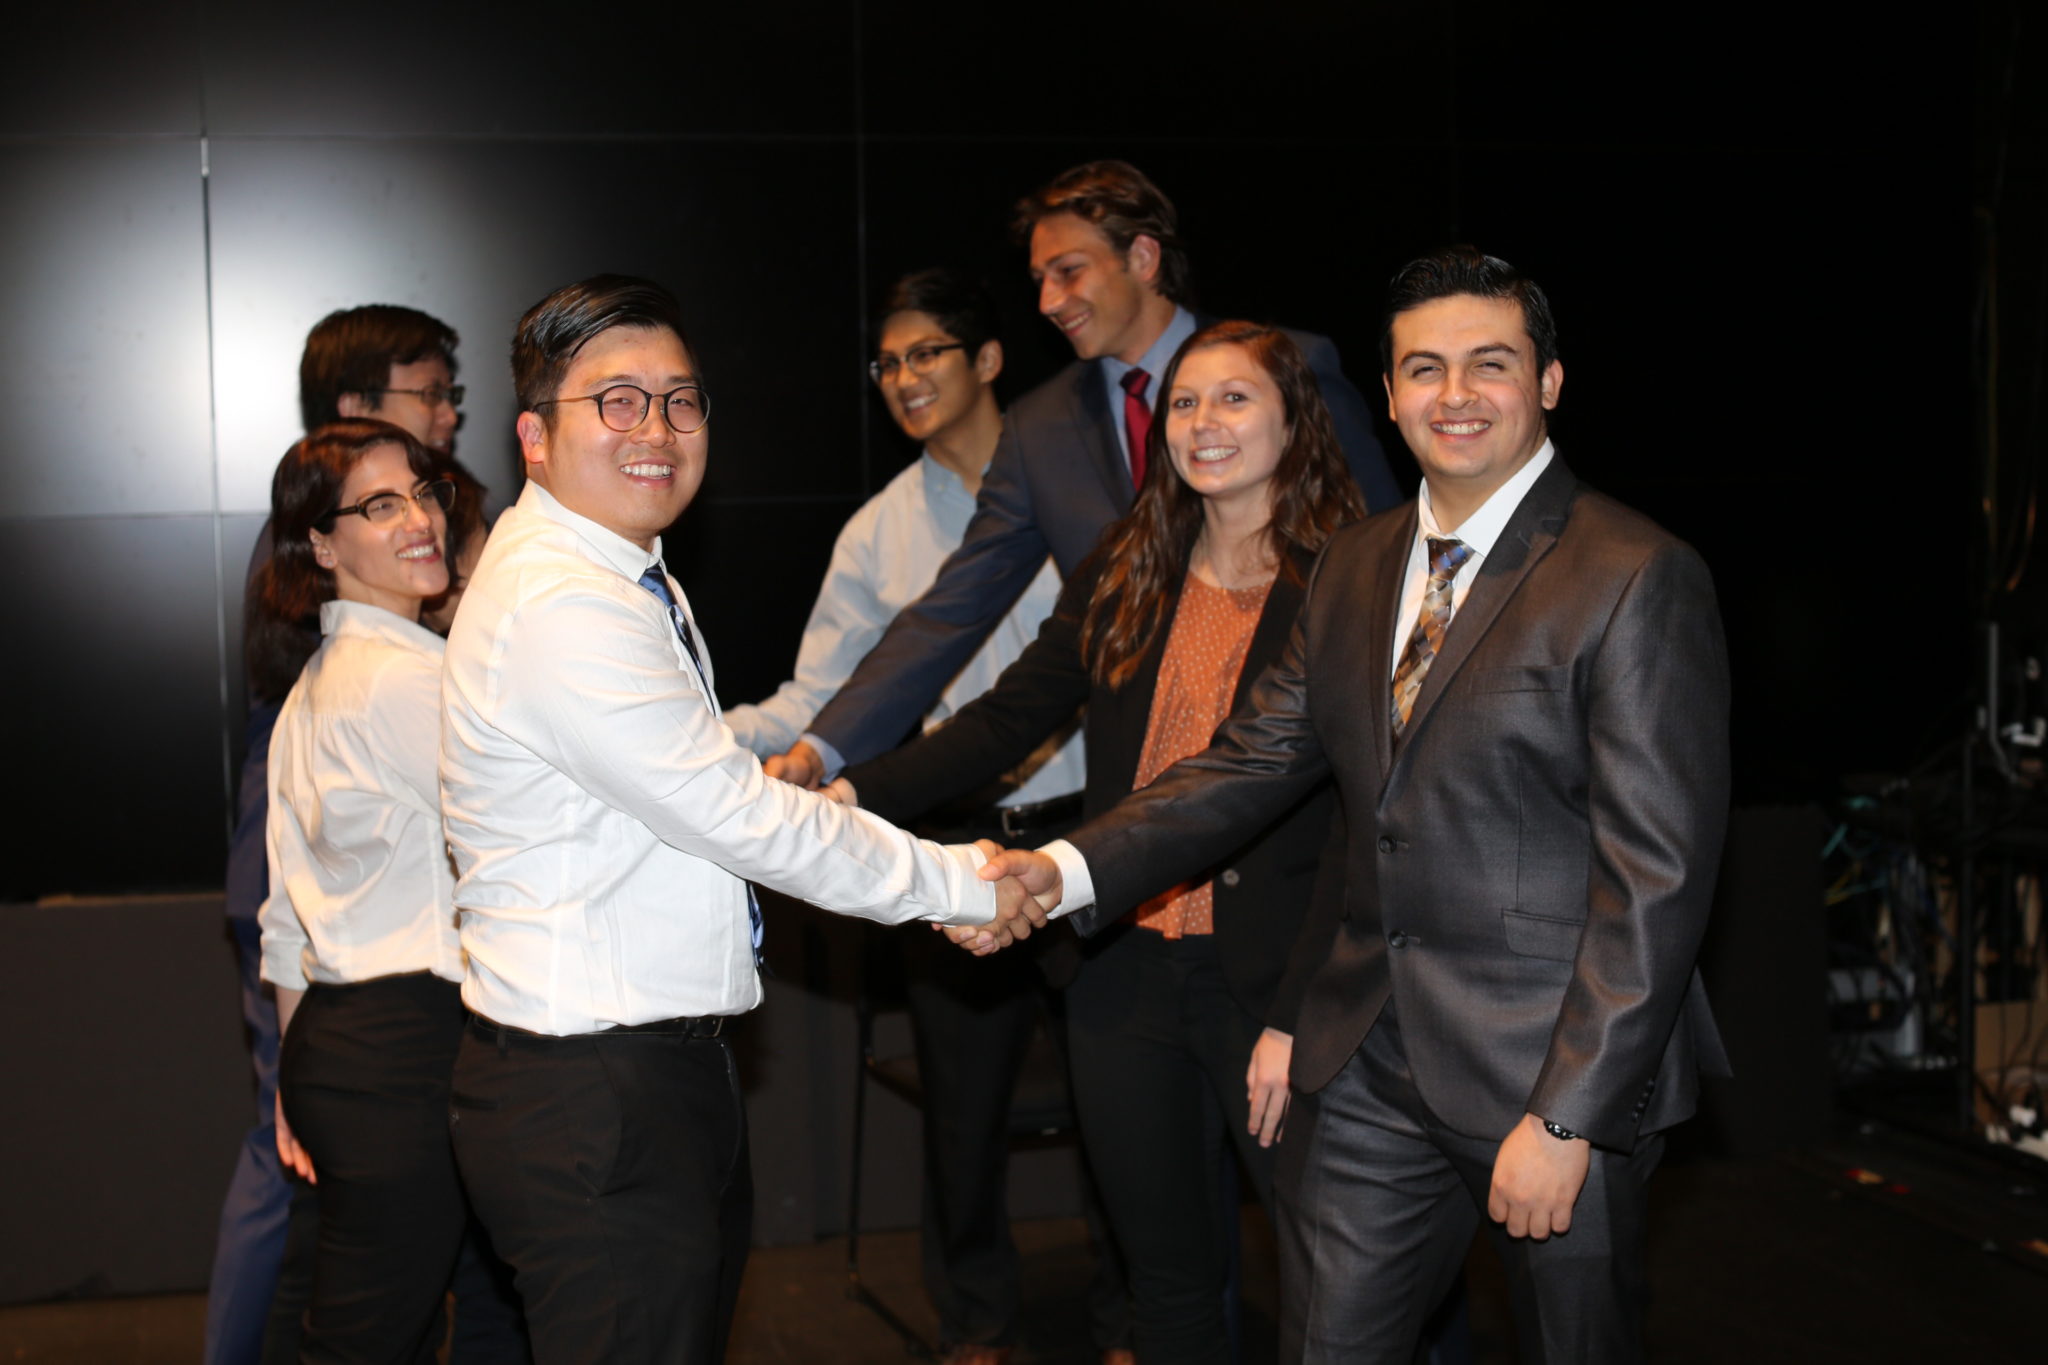 i4NS program members shaking hands at an event